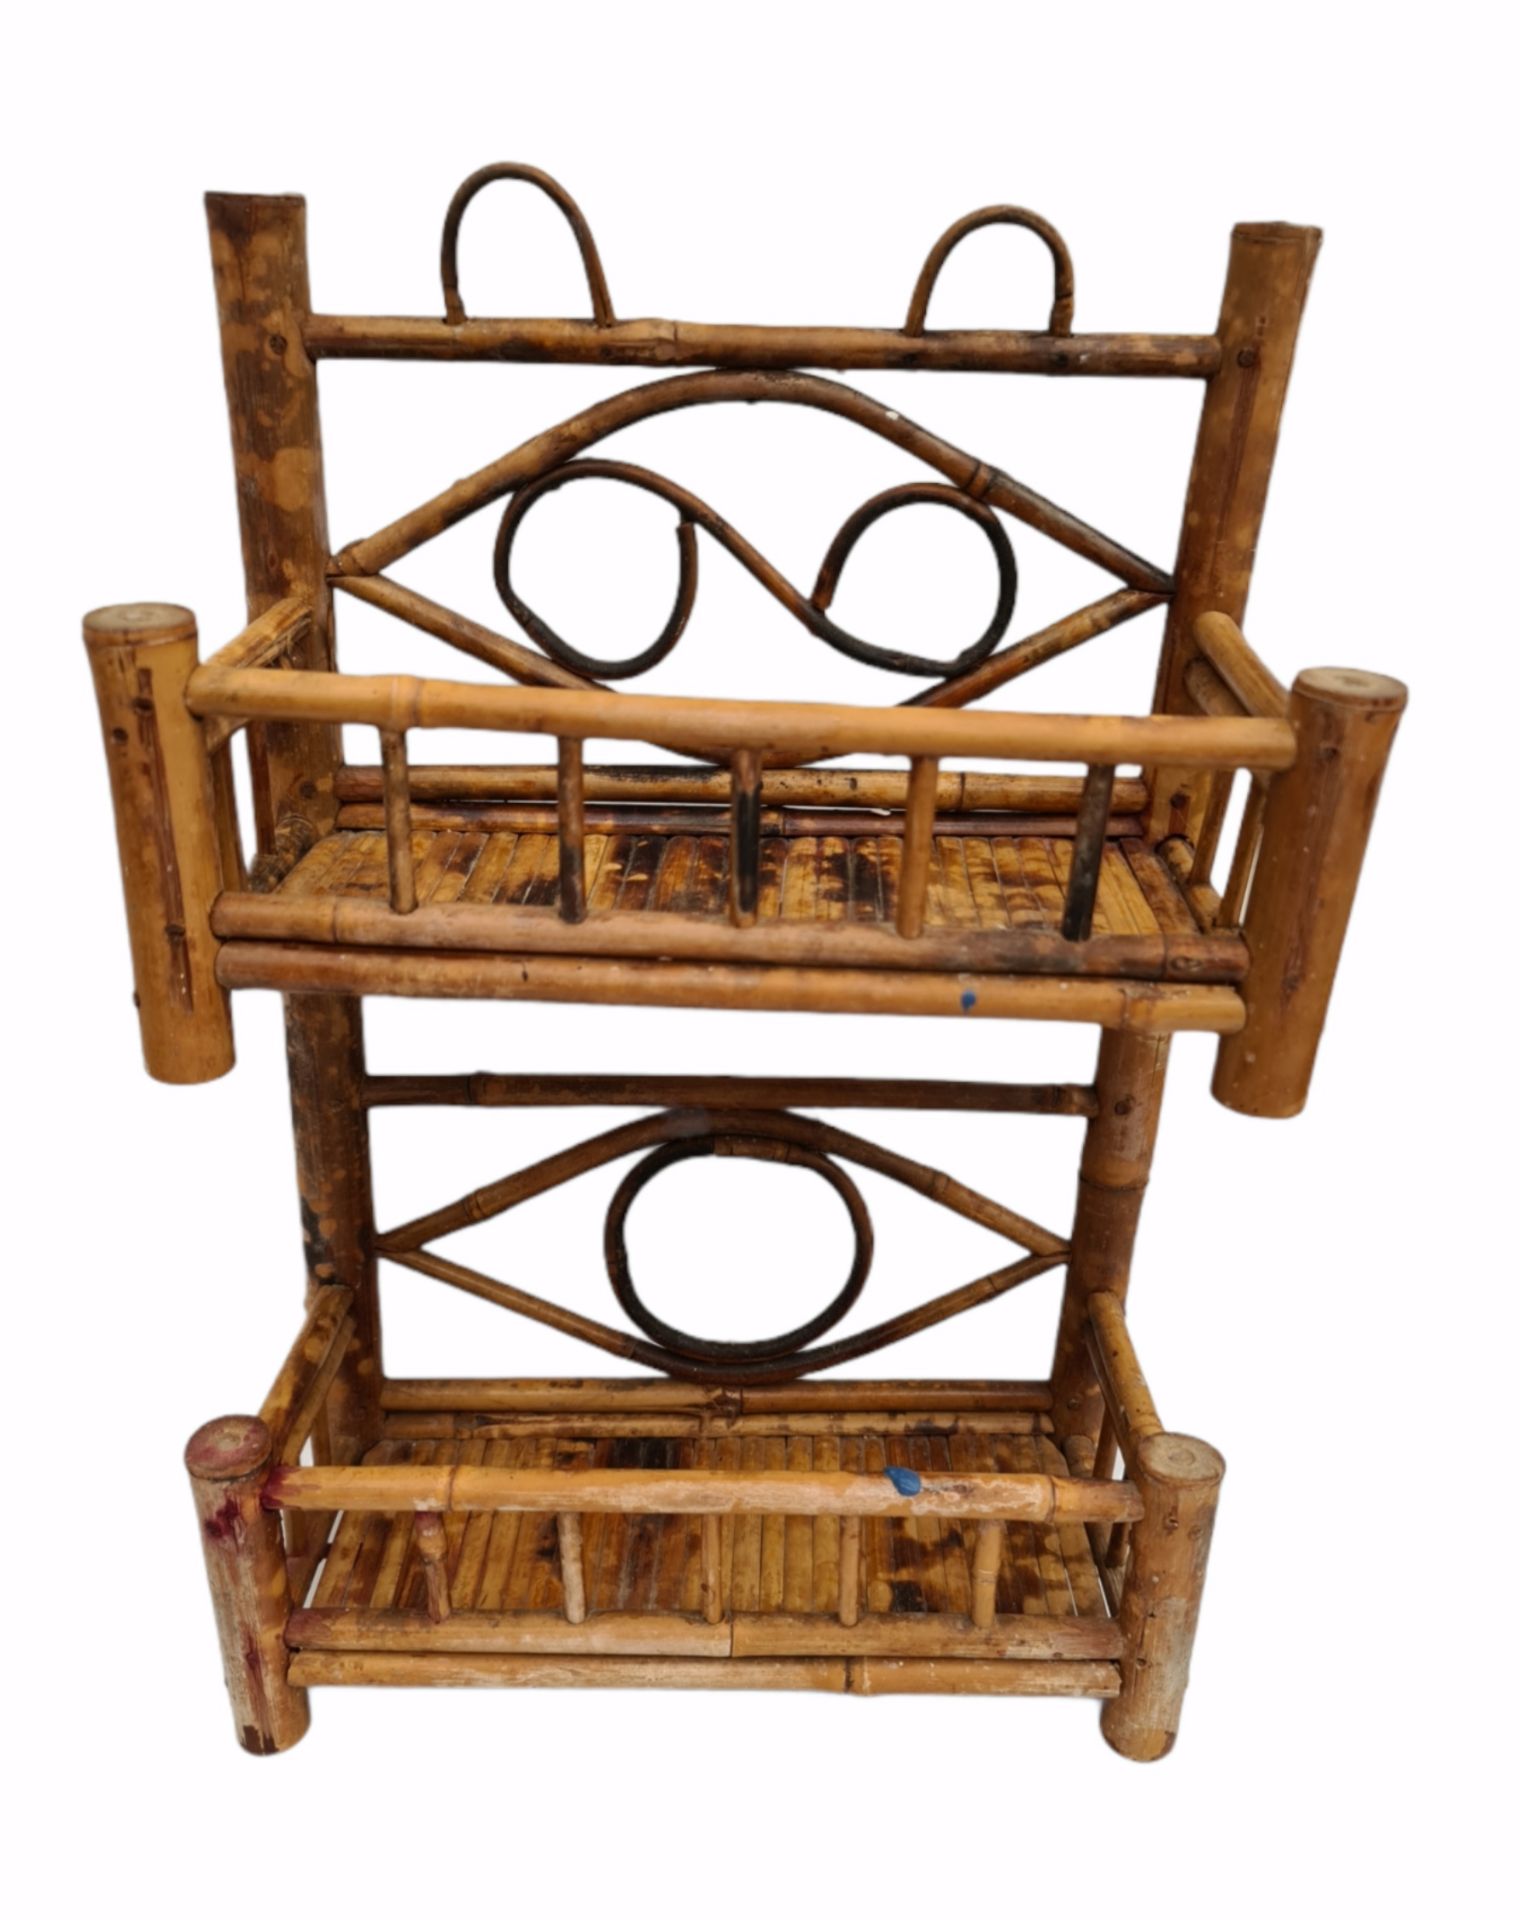 Vintage Bamboo Plant Stand or Spice Rack Vintage Bamboo Plant Stand or Spice Rack.Made from